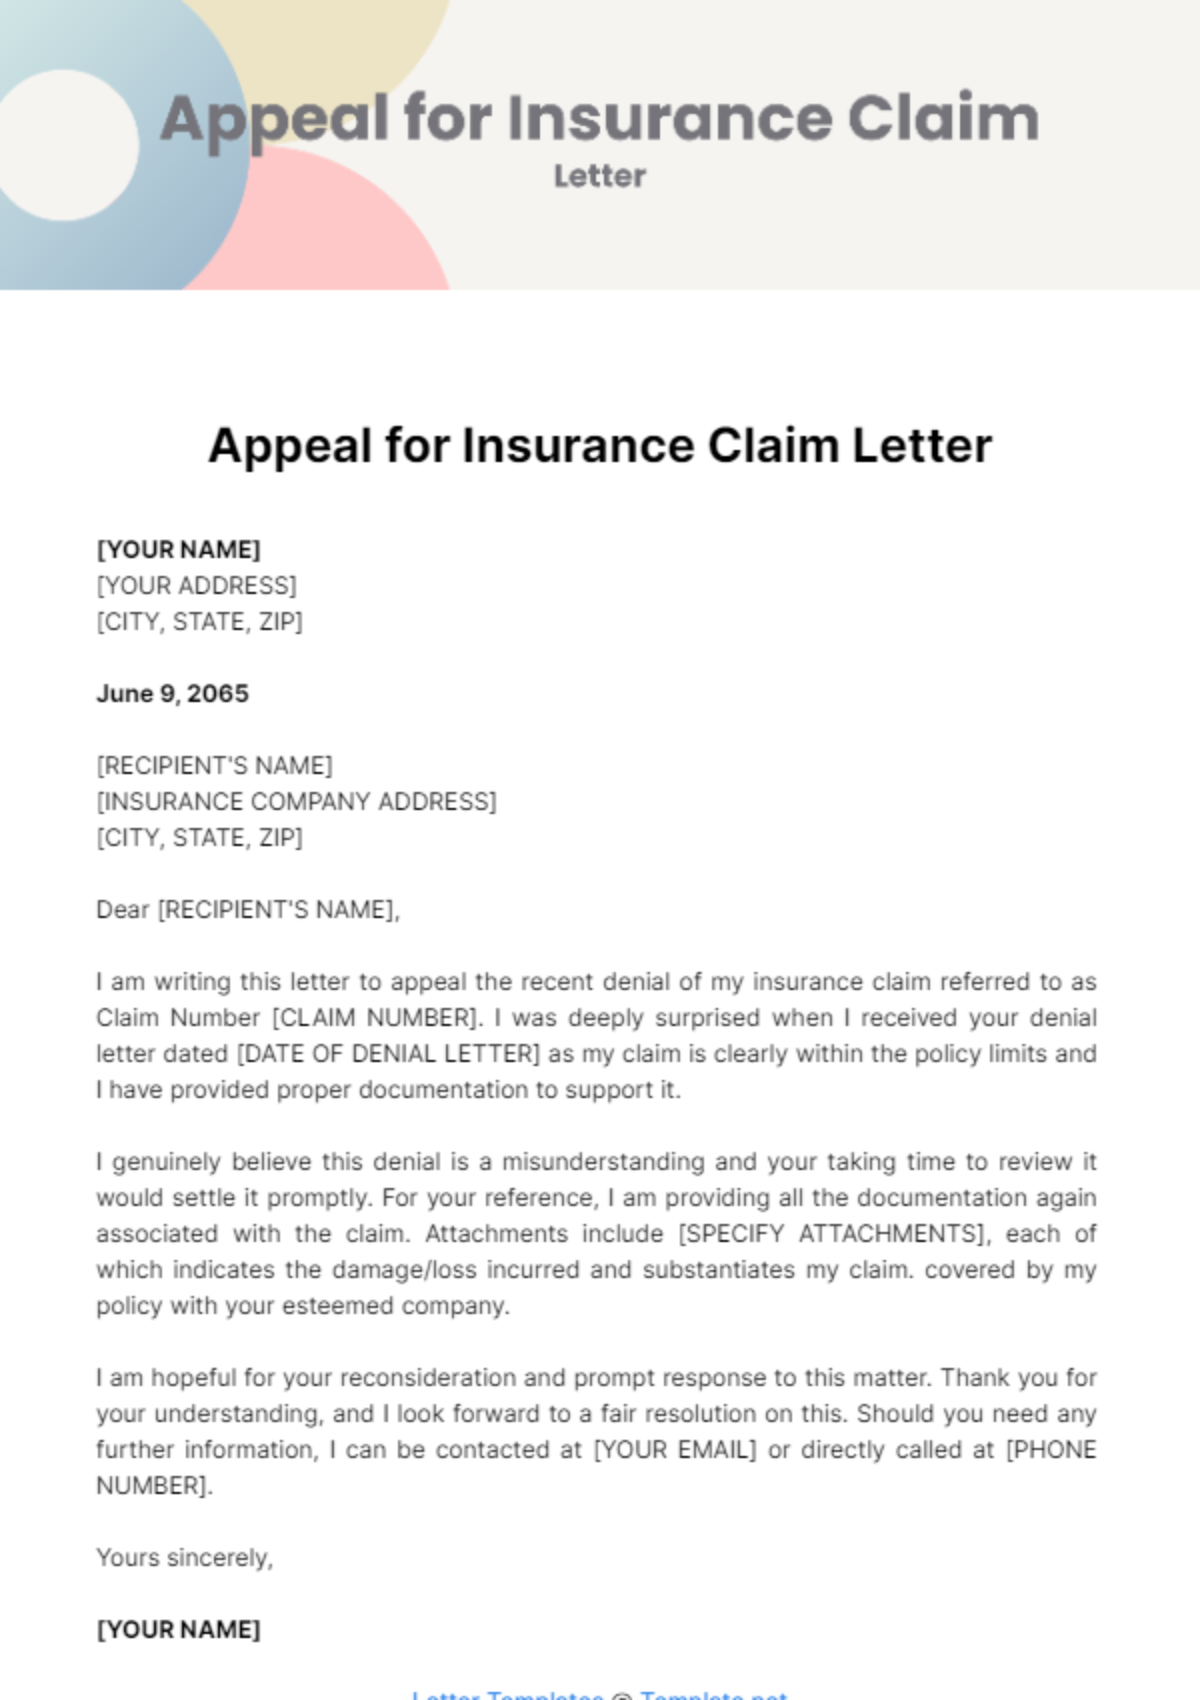 Appeal for Insurance Claim Letter Template